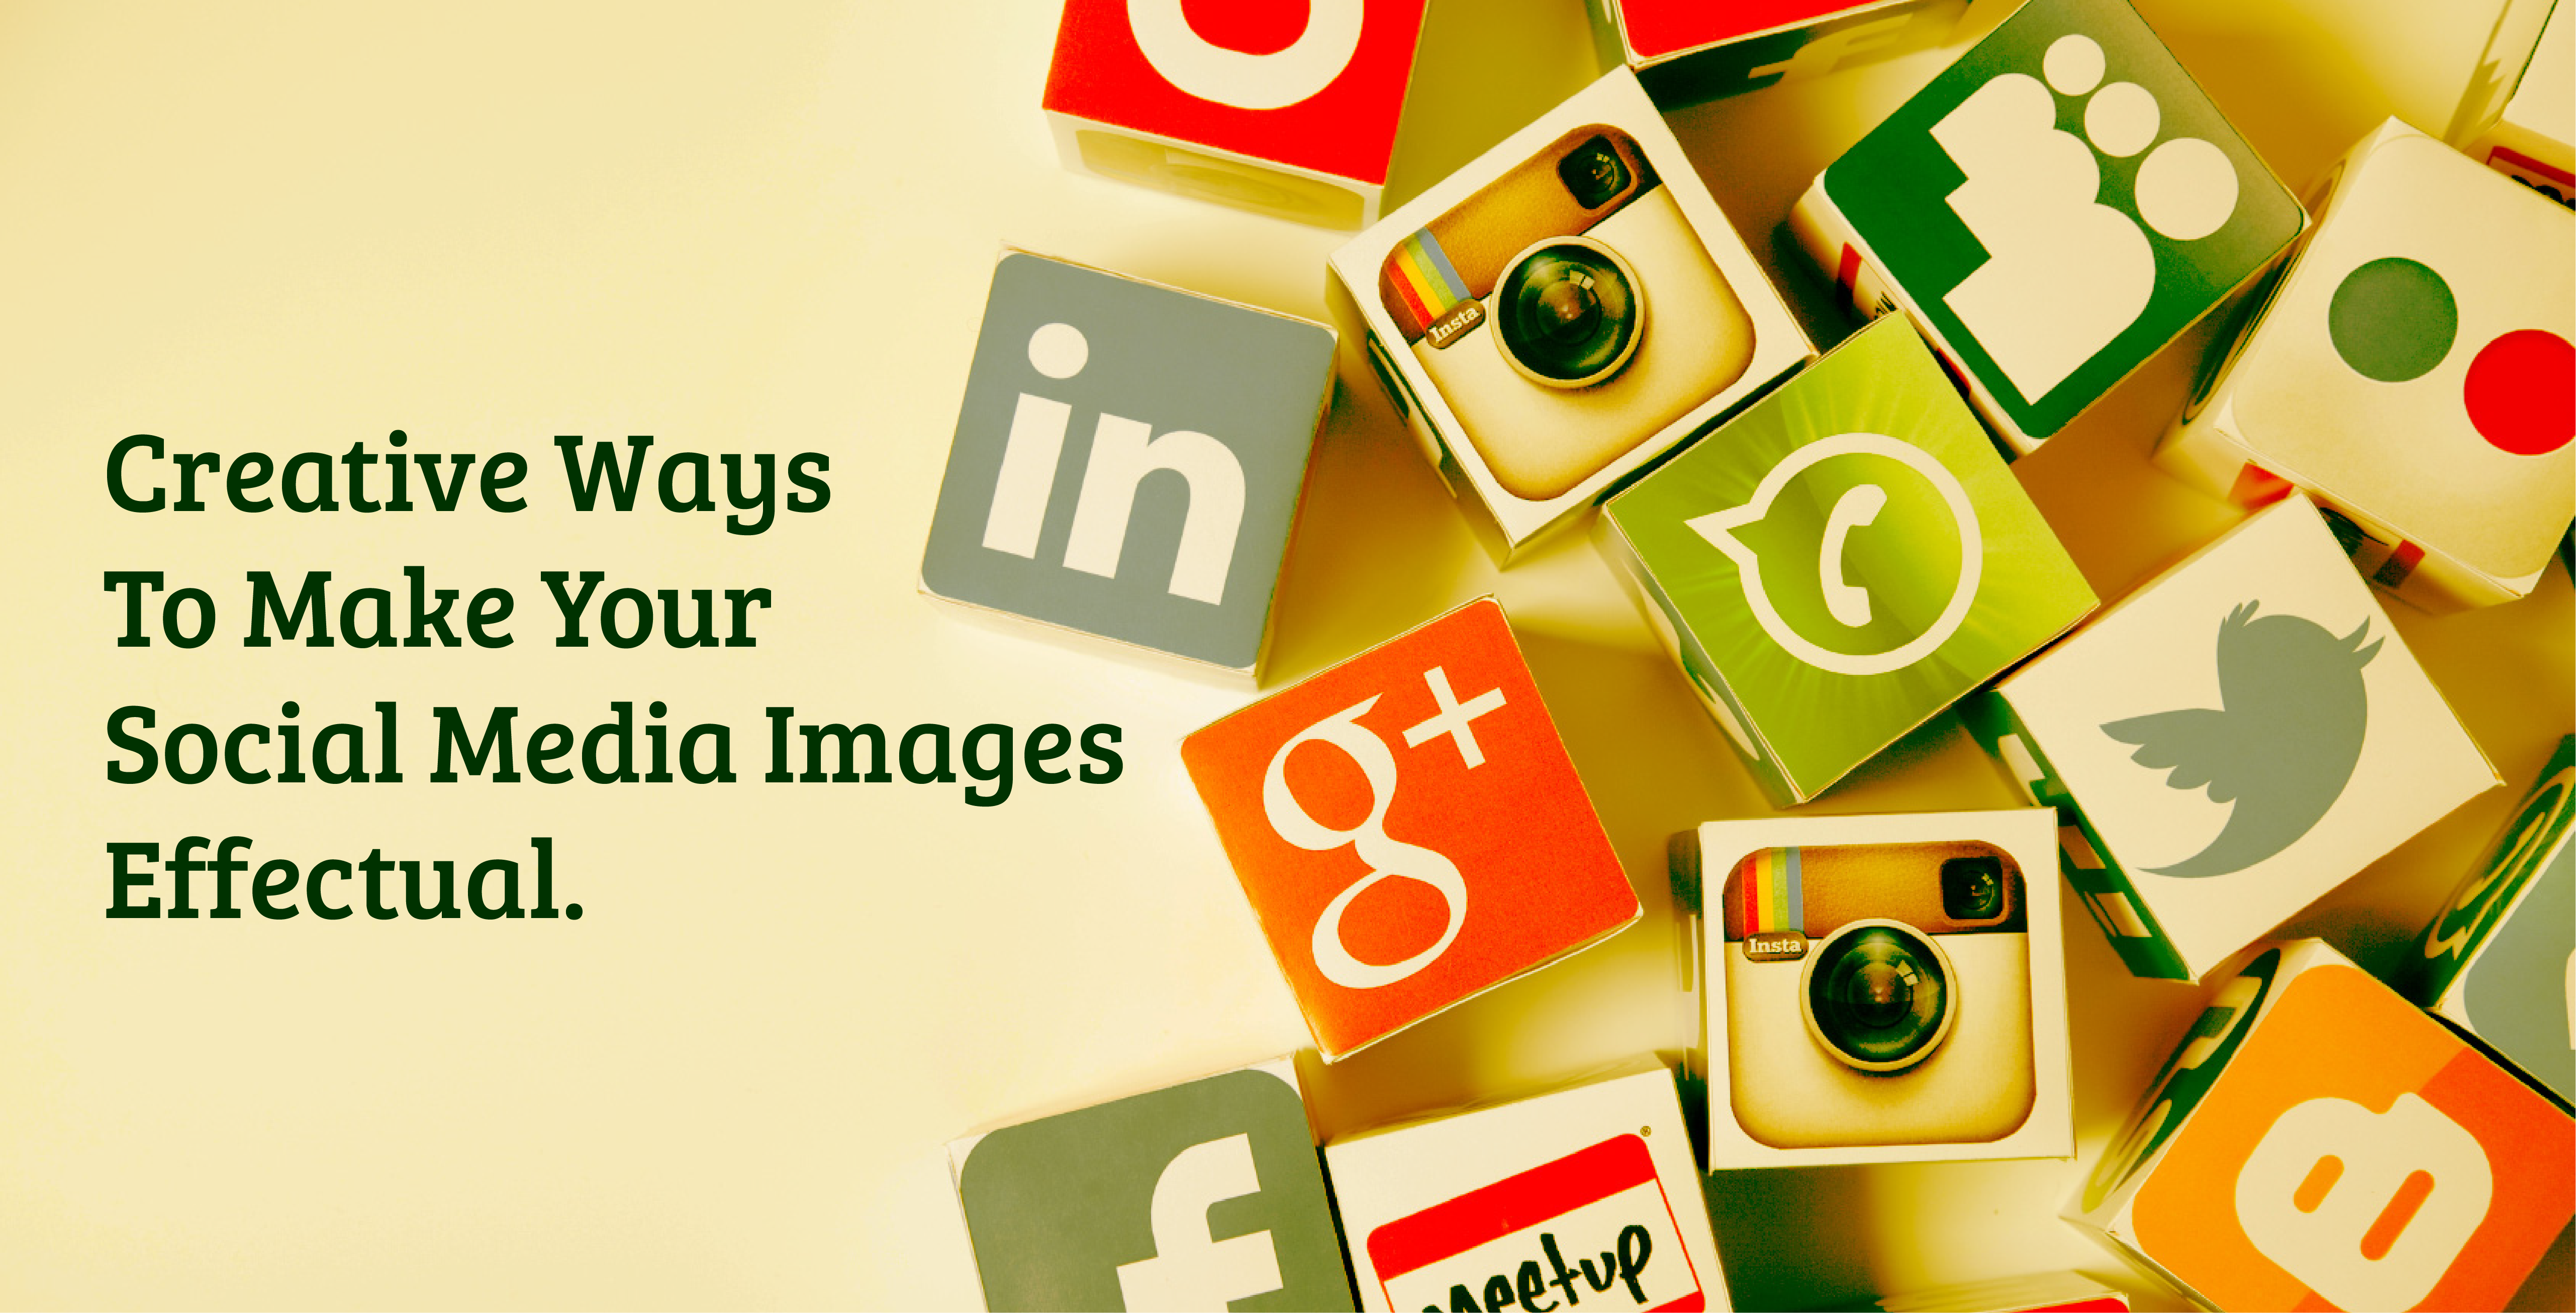 Creative Ways To Make Your Social Media Images Effectual